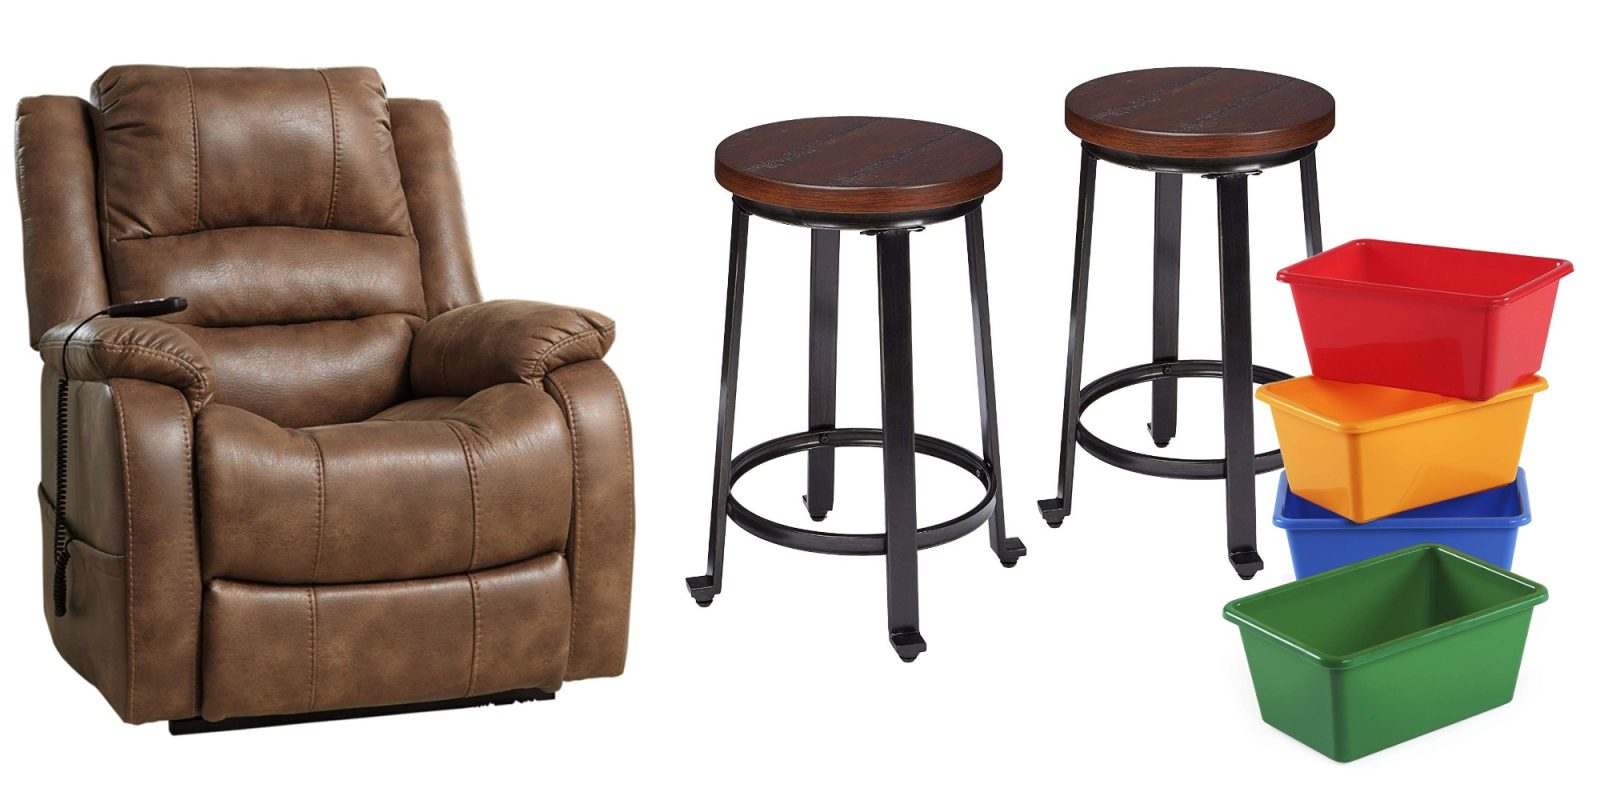 Furnish Your Home With Amazon S Up To 35 Off Cyber Monday Sale